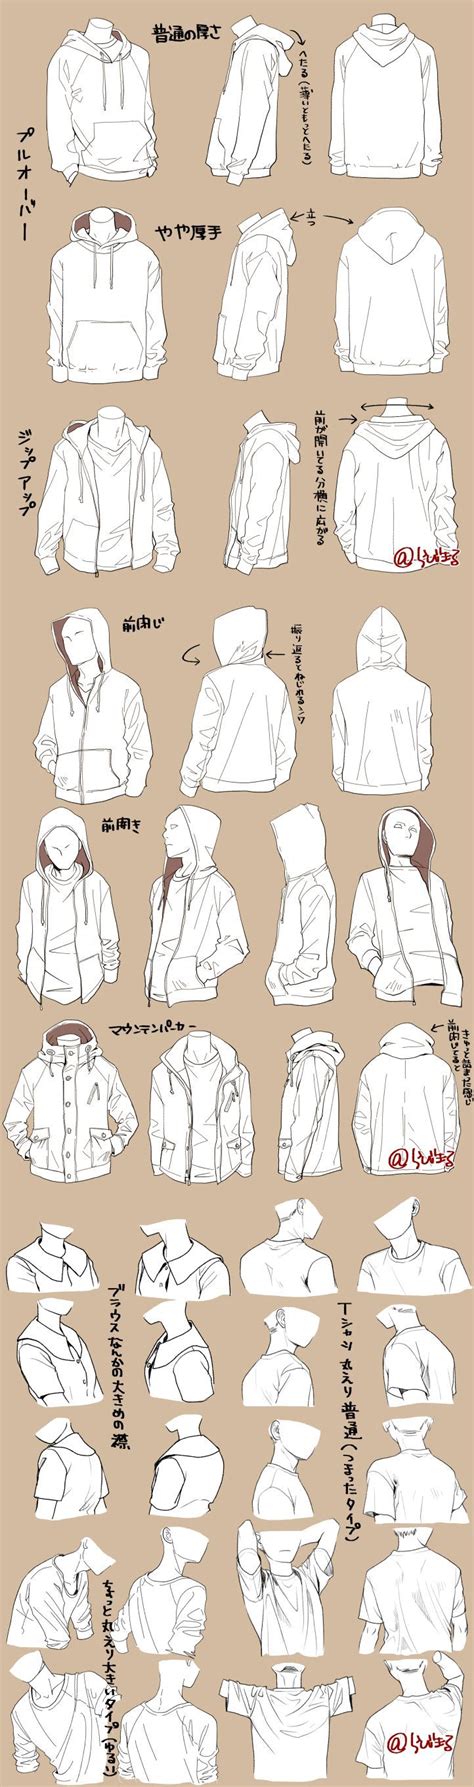 Different Kind Of Jackets How To Draw Clothing Clothing Drawing